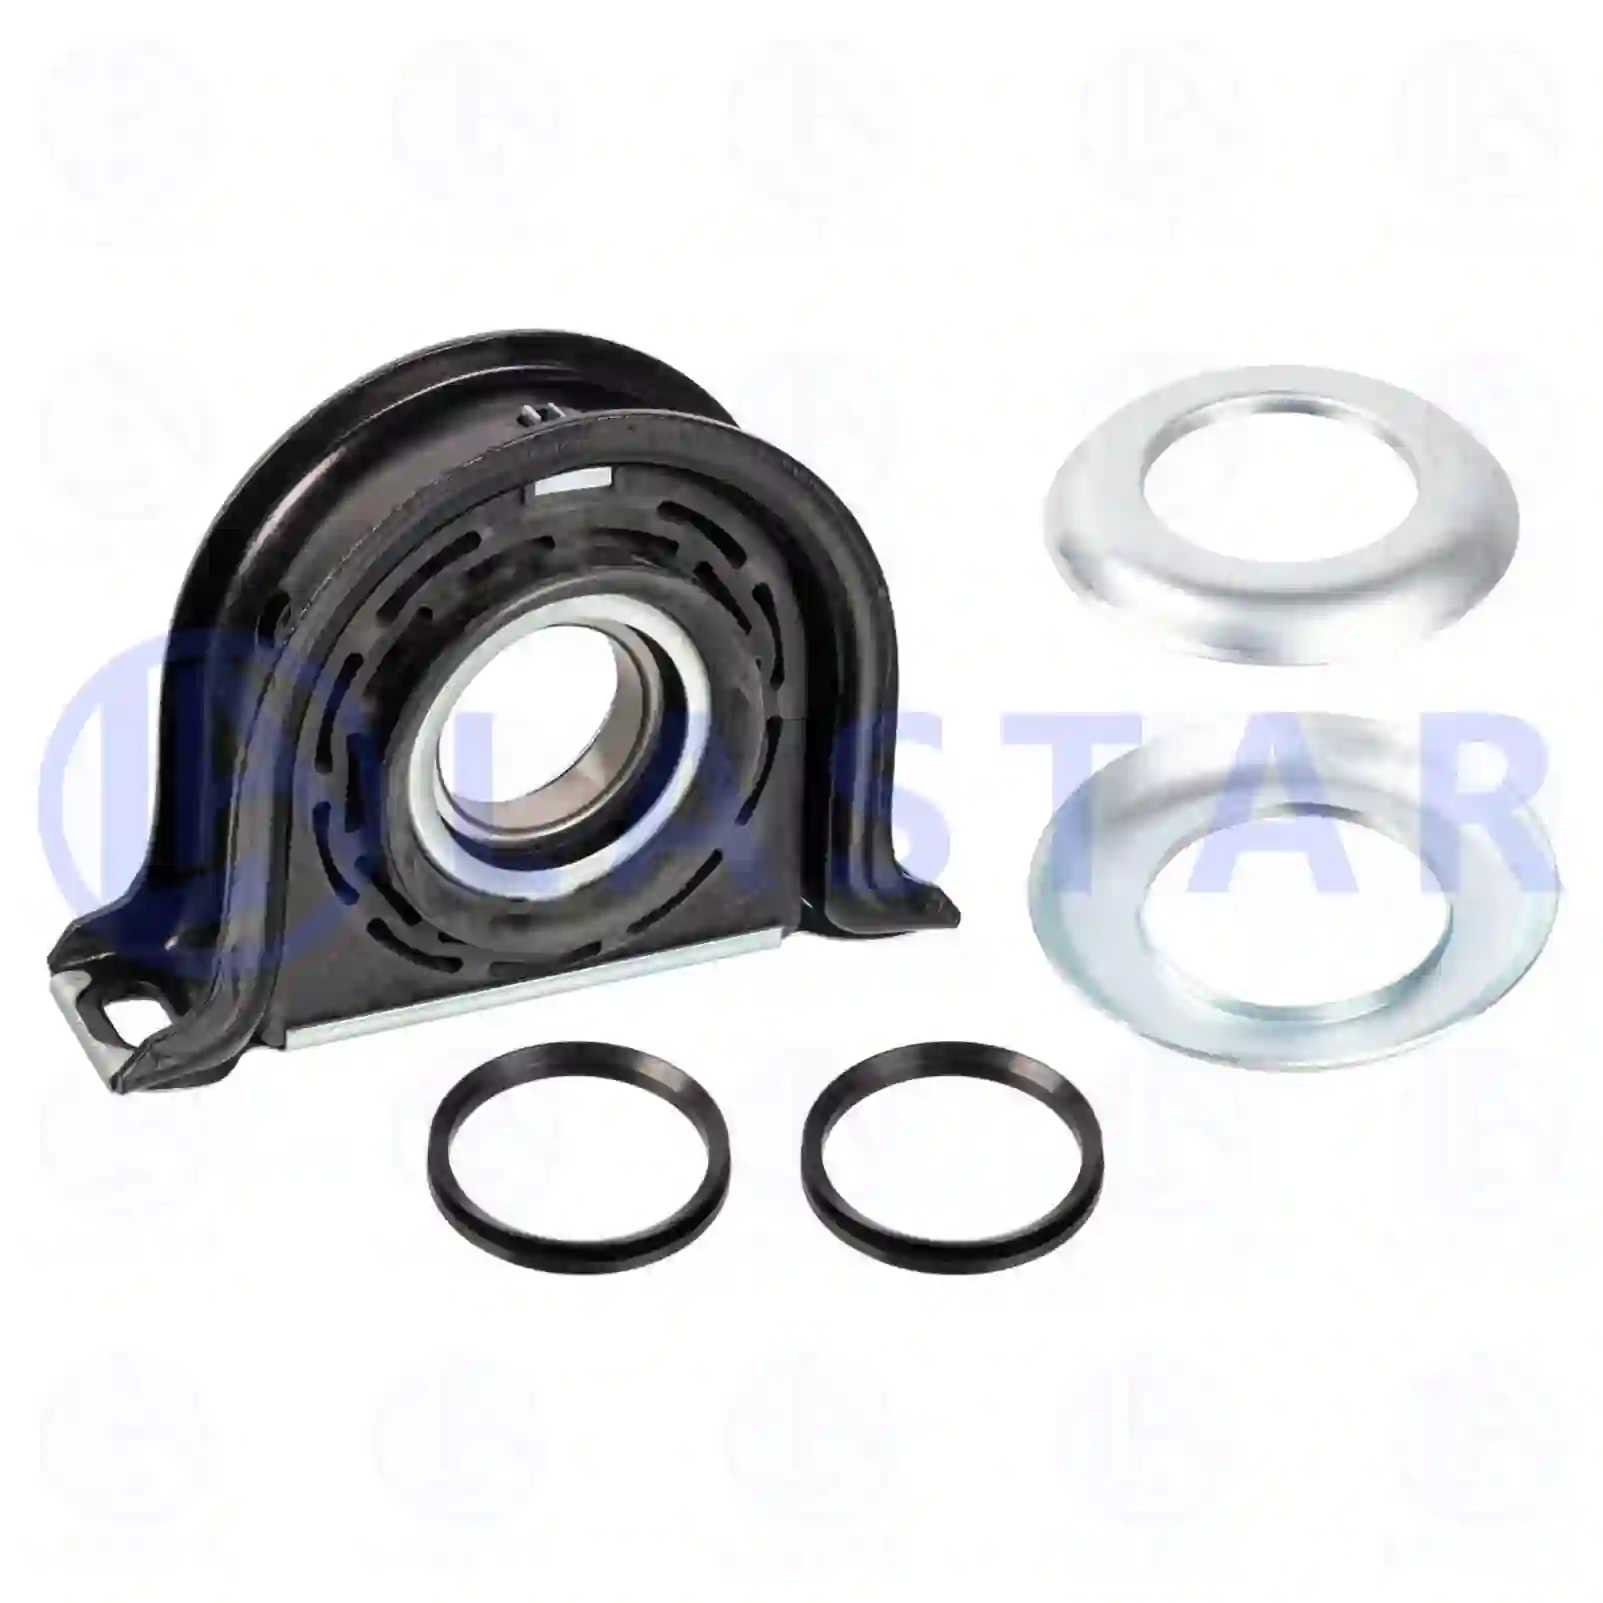 Support Bearing Center bearing, la no: 77734214 ,  oem no:1068208, 20471422, ZG02475-0008 Lastar Spare Part | Truck Spare Parts, Auotomotive Spare Parts